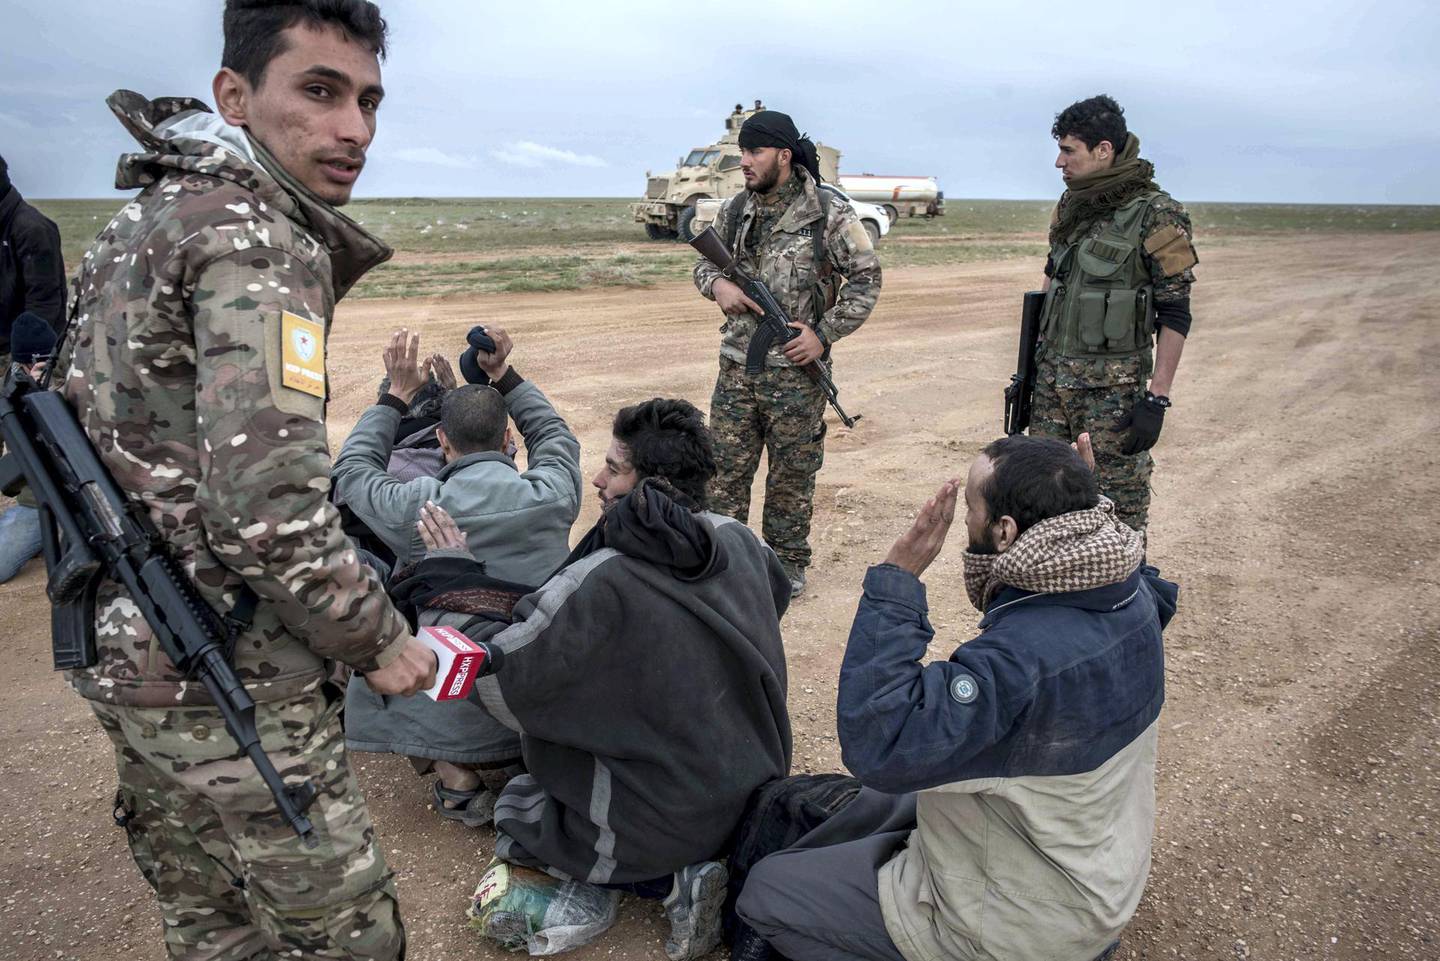 Men suspected of belonging to ISIS are screened by Syrian Democratic Forces after fleeing from the last pocket of territory held by the group outside Baghouz, Syria, 28 February 2019. Campbell MacDiarmid